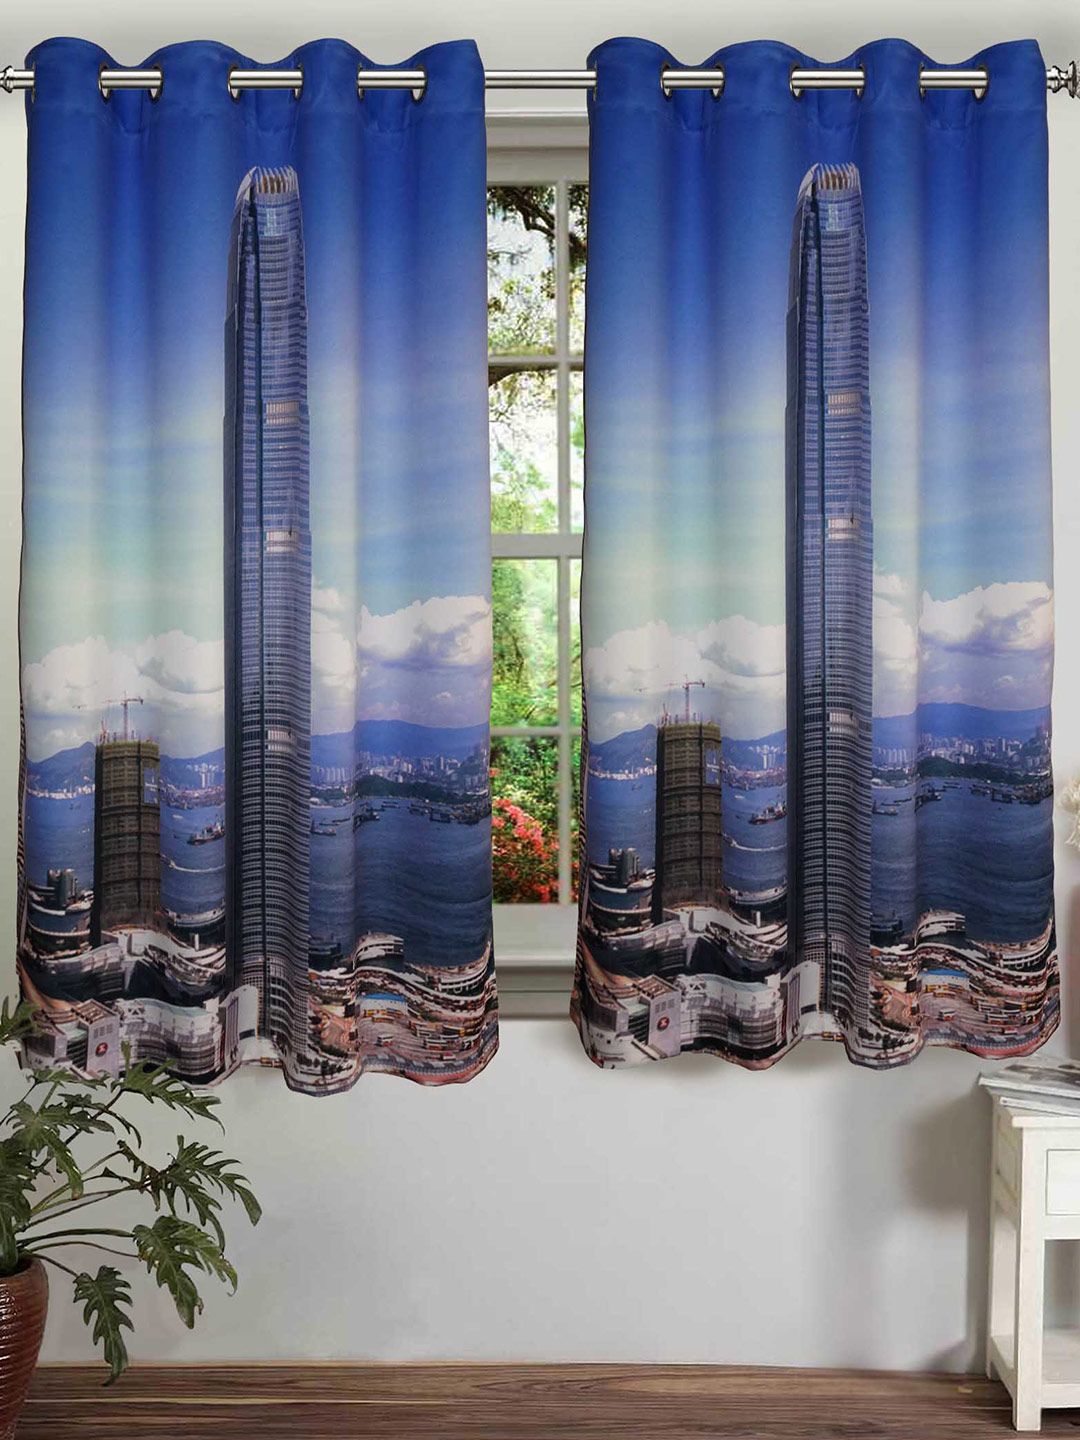 Lushomes Blue & White 3D Printed Window Curtain Price in India